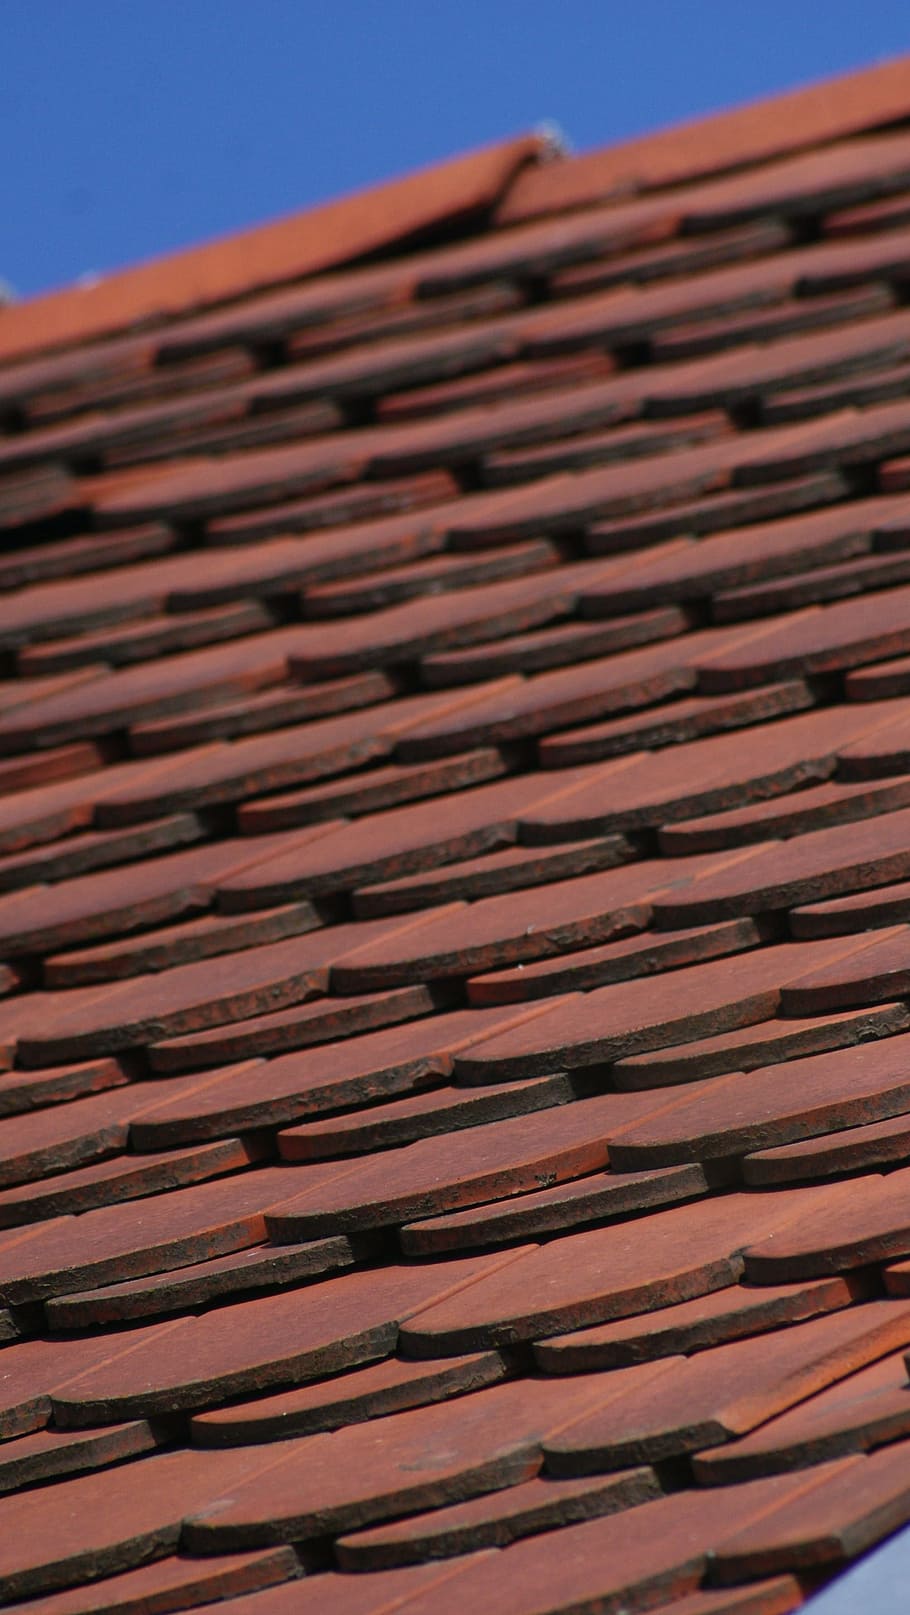 Tile, Attic, Rooftop, House, roof, roof Tile, architecture, red, terracotta, pattern